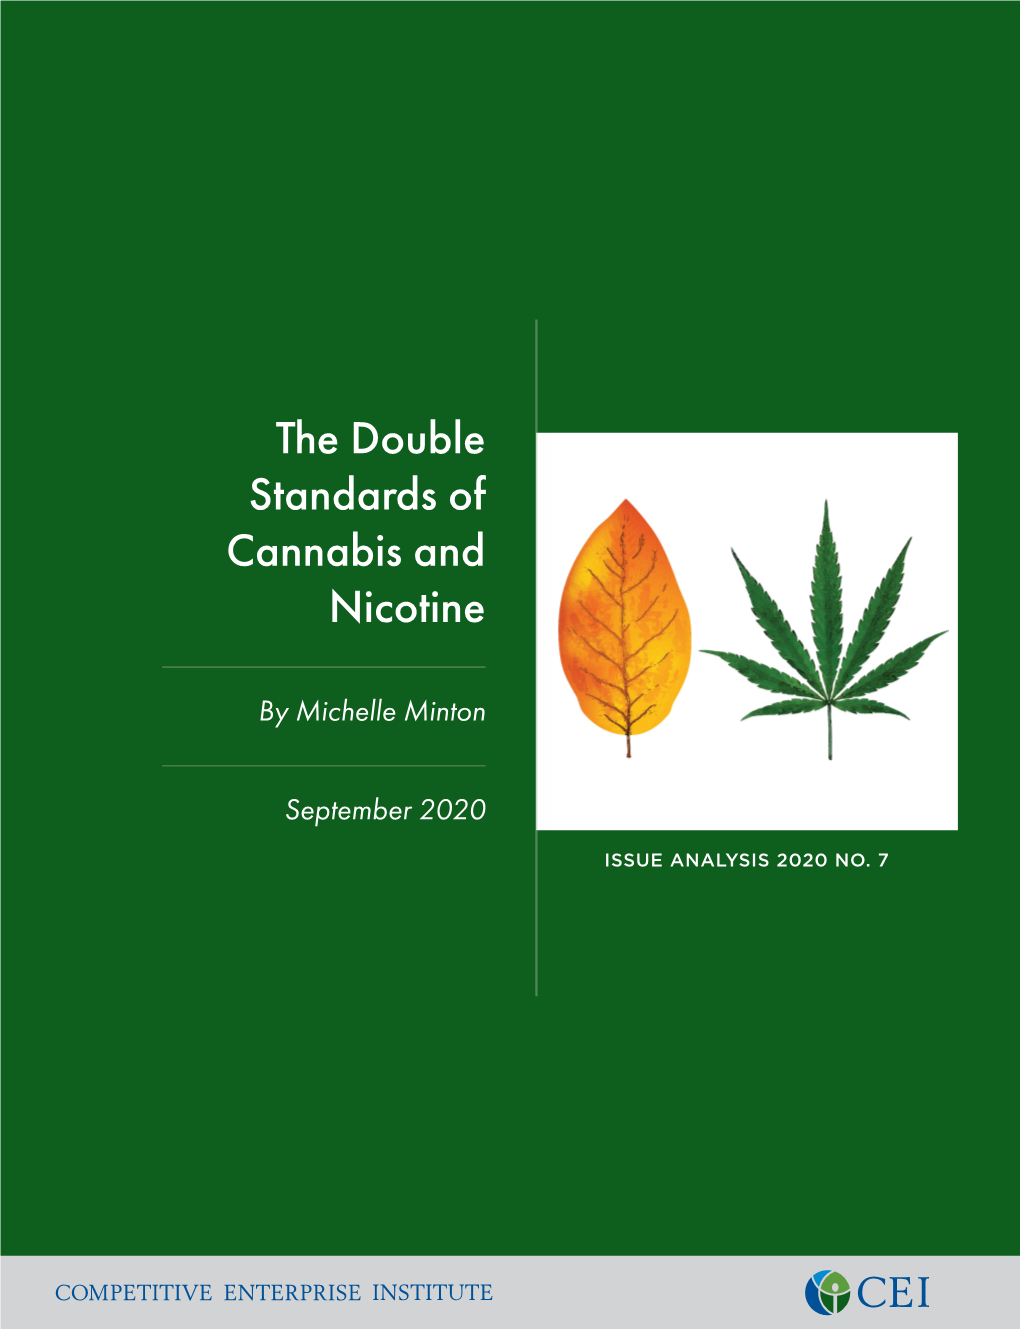 The Double Standards of Cannabis and Nicotine